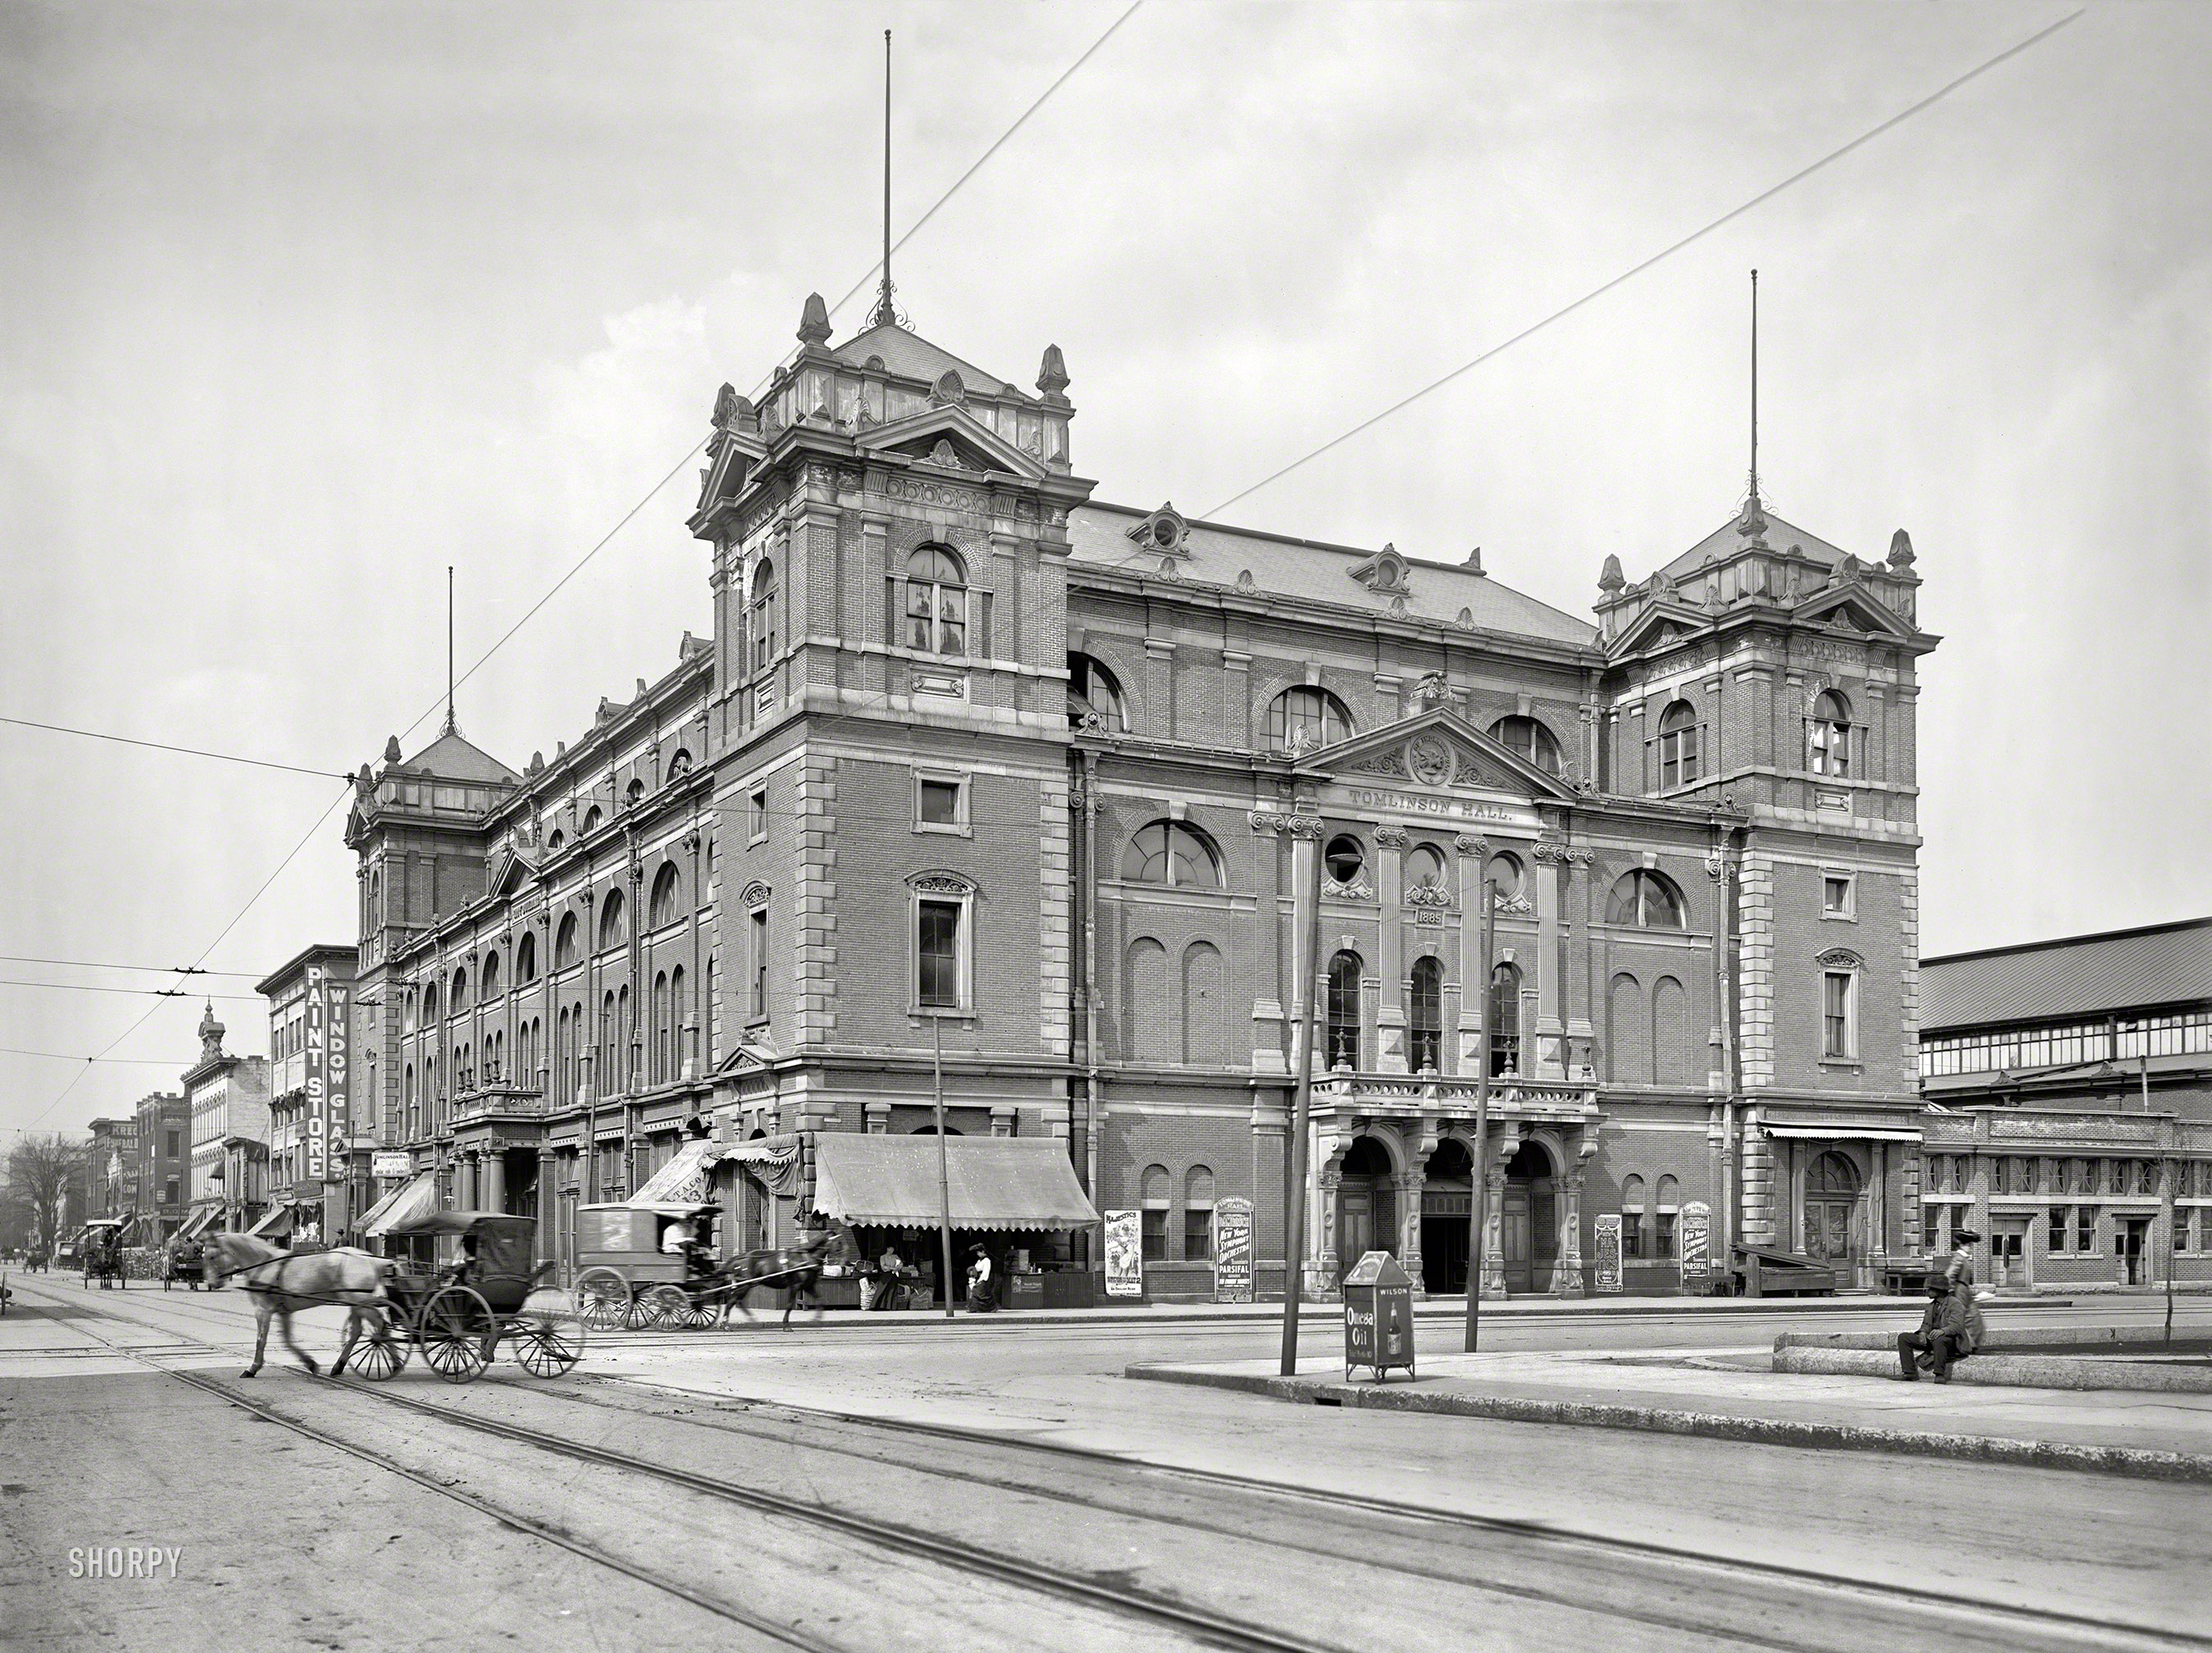 &nbsp; &nbsp; &nbsp; &nbsp; Demolished in 1958 after being gutted by a four-alarm fire.
Indianapolis, 1904. "Tomlinson Hall, Delaware and Market streets." Continuing our visit to Indiana's capital city, with the second "Omega Oil" waste bin in as many days. 8x10 inch glass negative, Detroit Photographic Co. View full size.